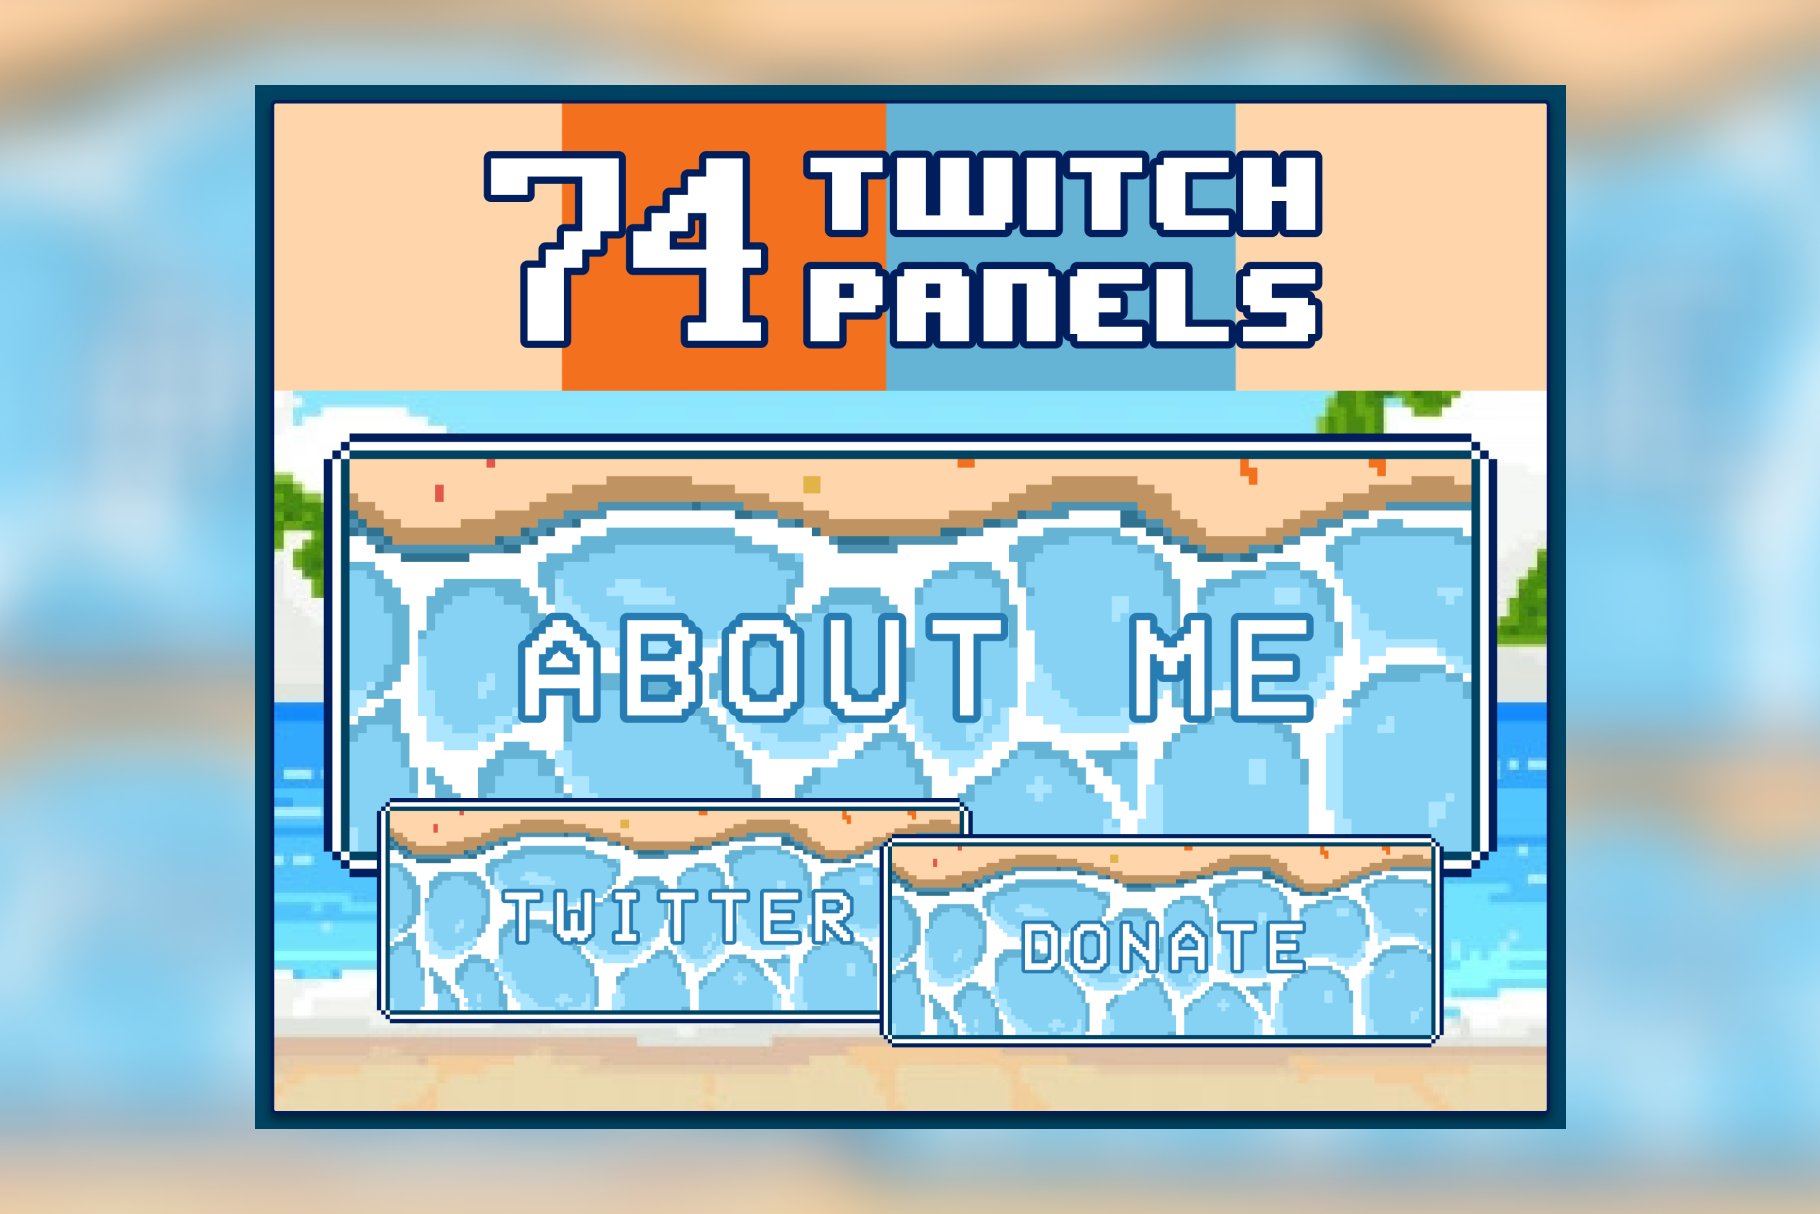 74x Ocean Pixel Panels for Twitch cover image.